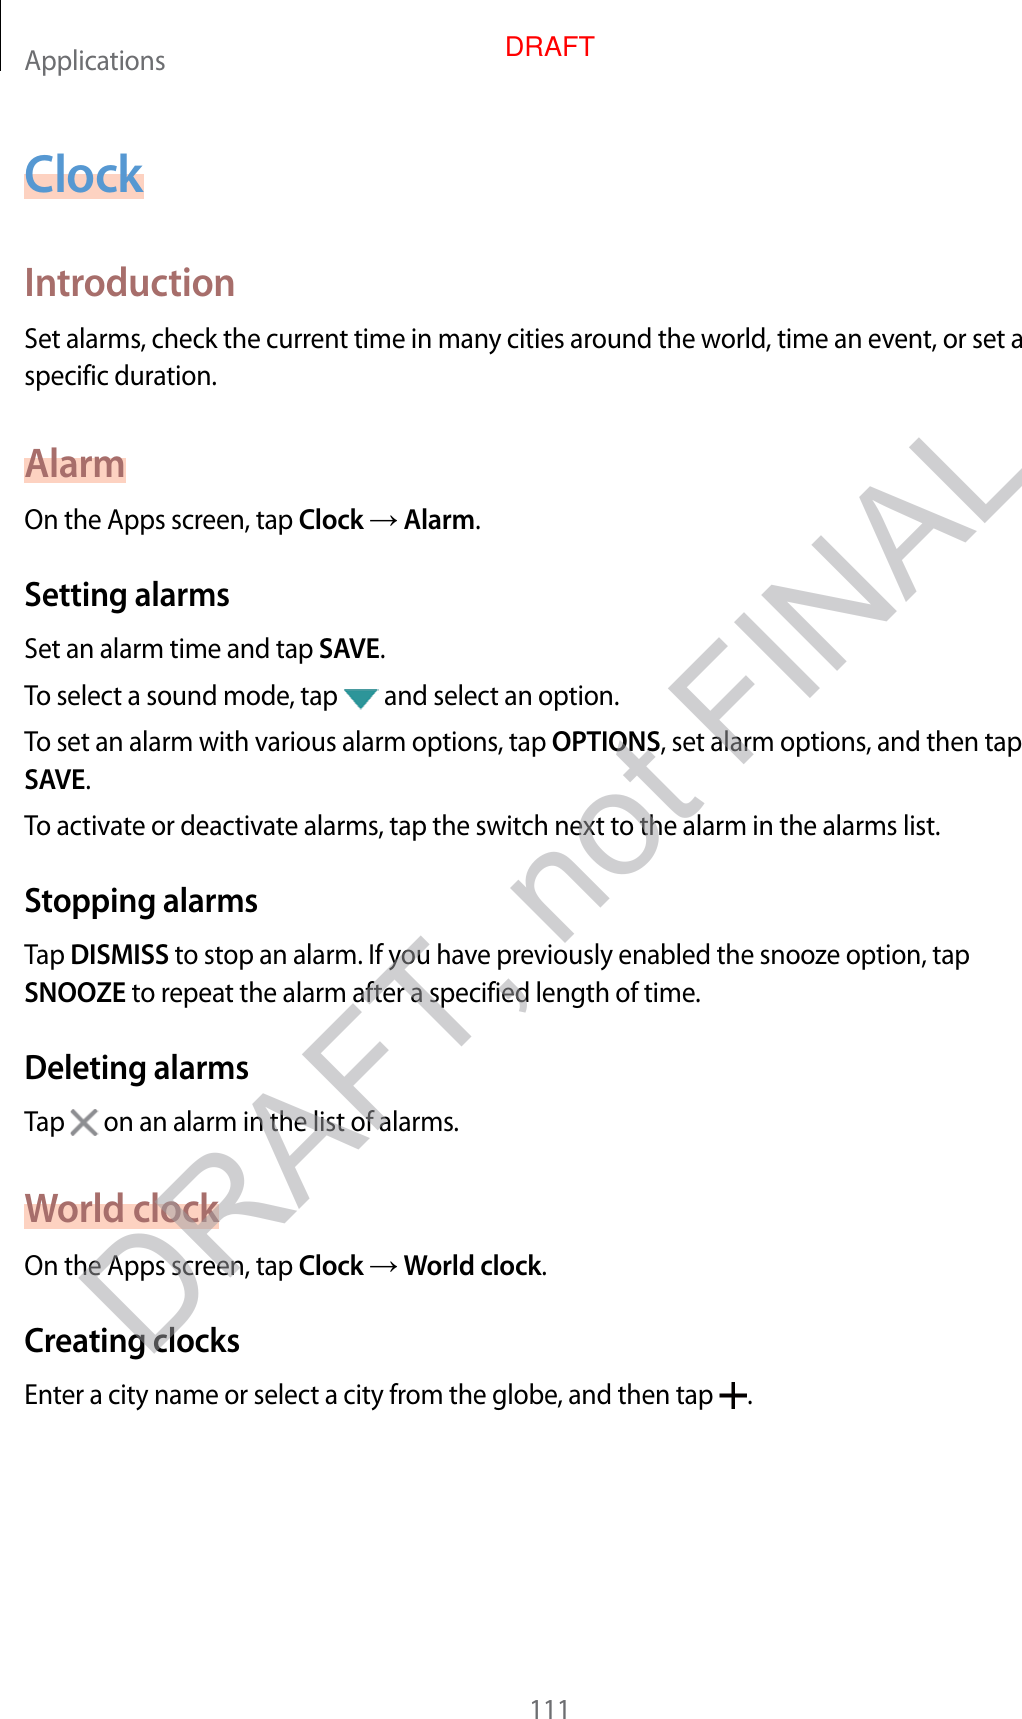 Applications111ClockIntroductionSet alarms, check the current time in man y cities ar ound the w orld , time an ev ent, or set a specific duration.AlarmOn the Apps screen, tap Clock  Alarm.Setting alarmsSet an alarm time and tap SAVE.To select a sound mode, tap   and select an option.To set an alarm with various alarm options, tap OPTIONS, set alarm options, and then tap SAVE.To activate or deactivate alarms, tap the switch ne xt to the alarm in the alarms list.Stopping alarmsTap DISMISS to stop an alarm. If you hav e pr eviously enabled the snoo z e option, tap SNOOZE to repea t the alarm after a specified length of time.Deleting alarmsTap   on an alarm in the list of alarms.World clockOn the Apps screen, tap Clock  World clock.Crea ting clocksEnter a city name or select a city from the globe , and then tap  .DRAFT, not FINALDRAFT